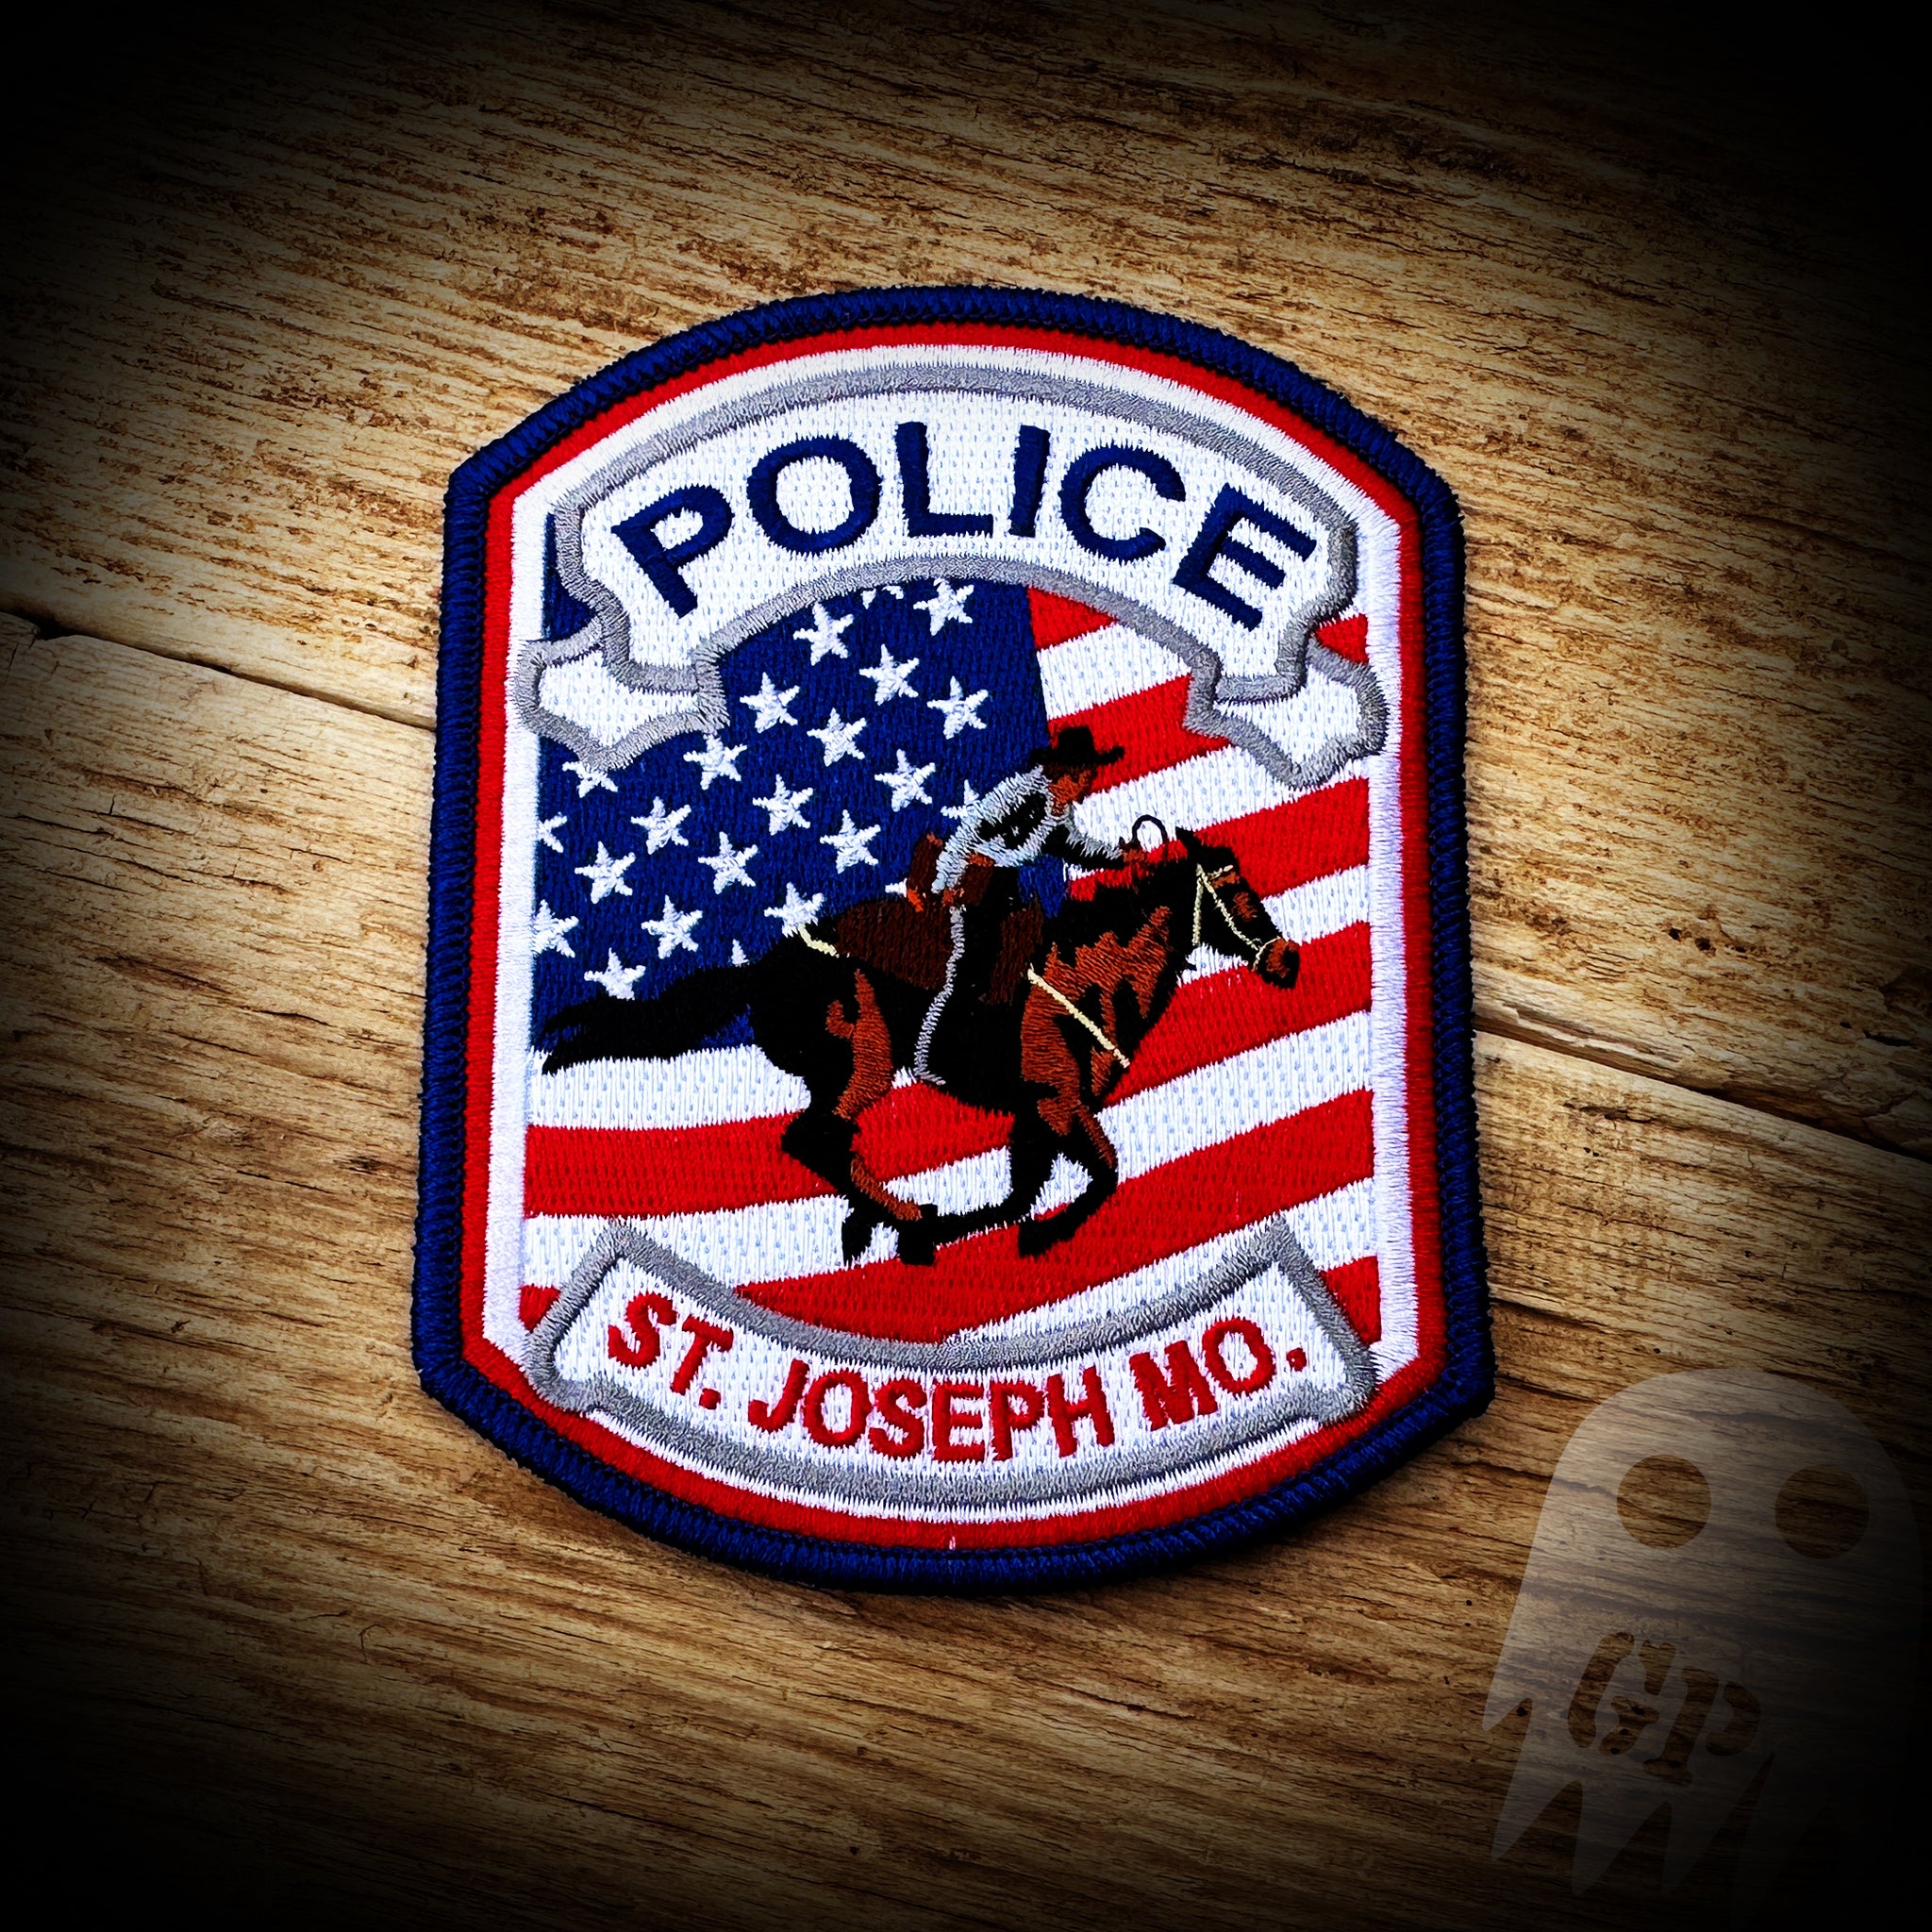 4th of July - St. Joseph, MO Police Department 4th of July Patch - Authentic/Limited